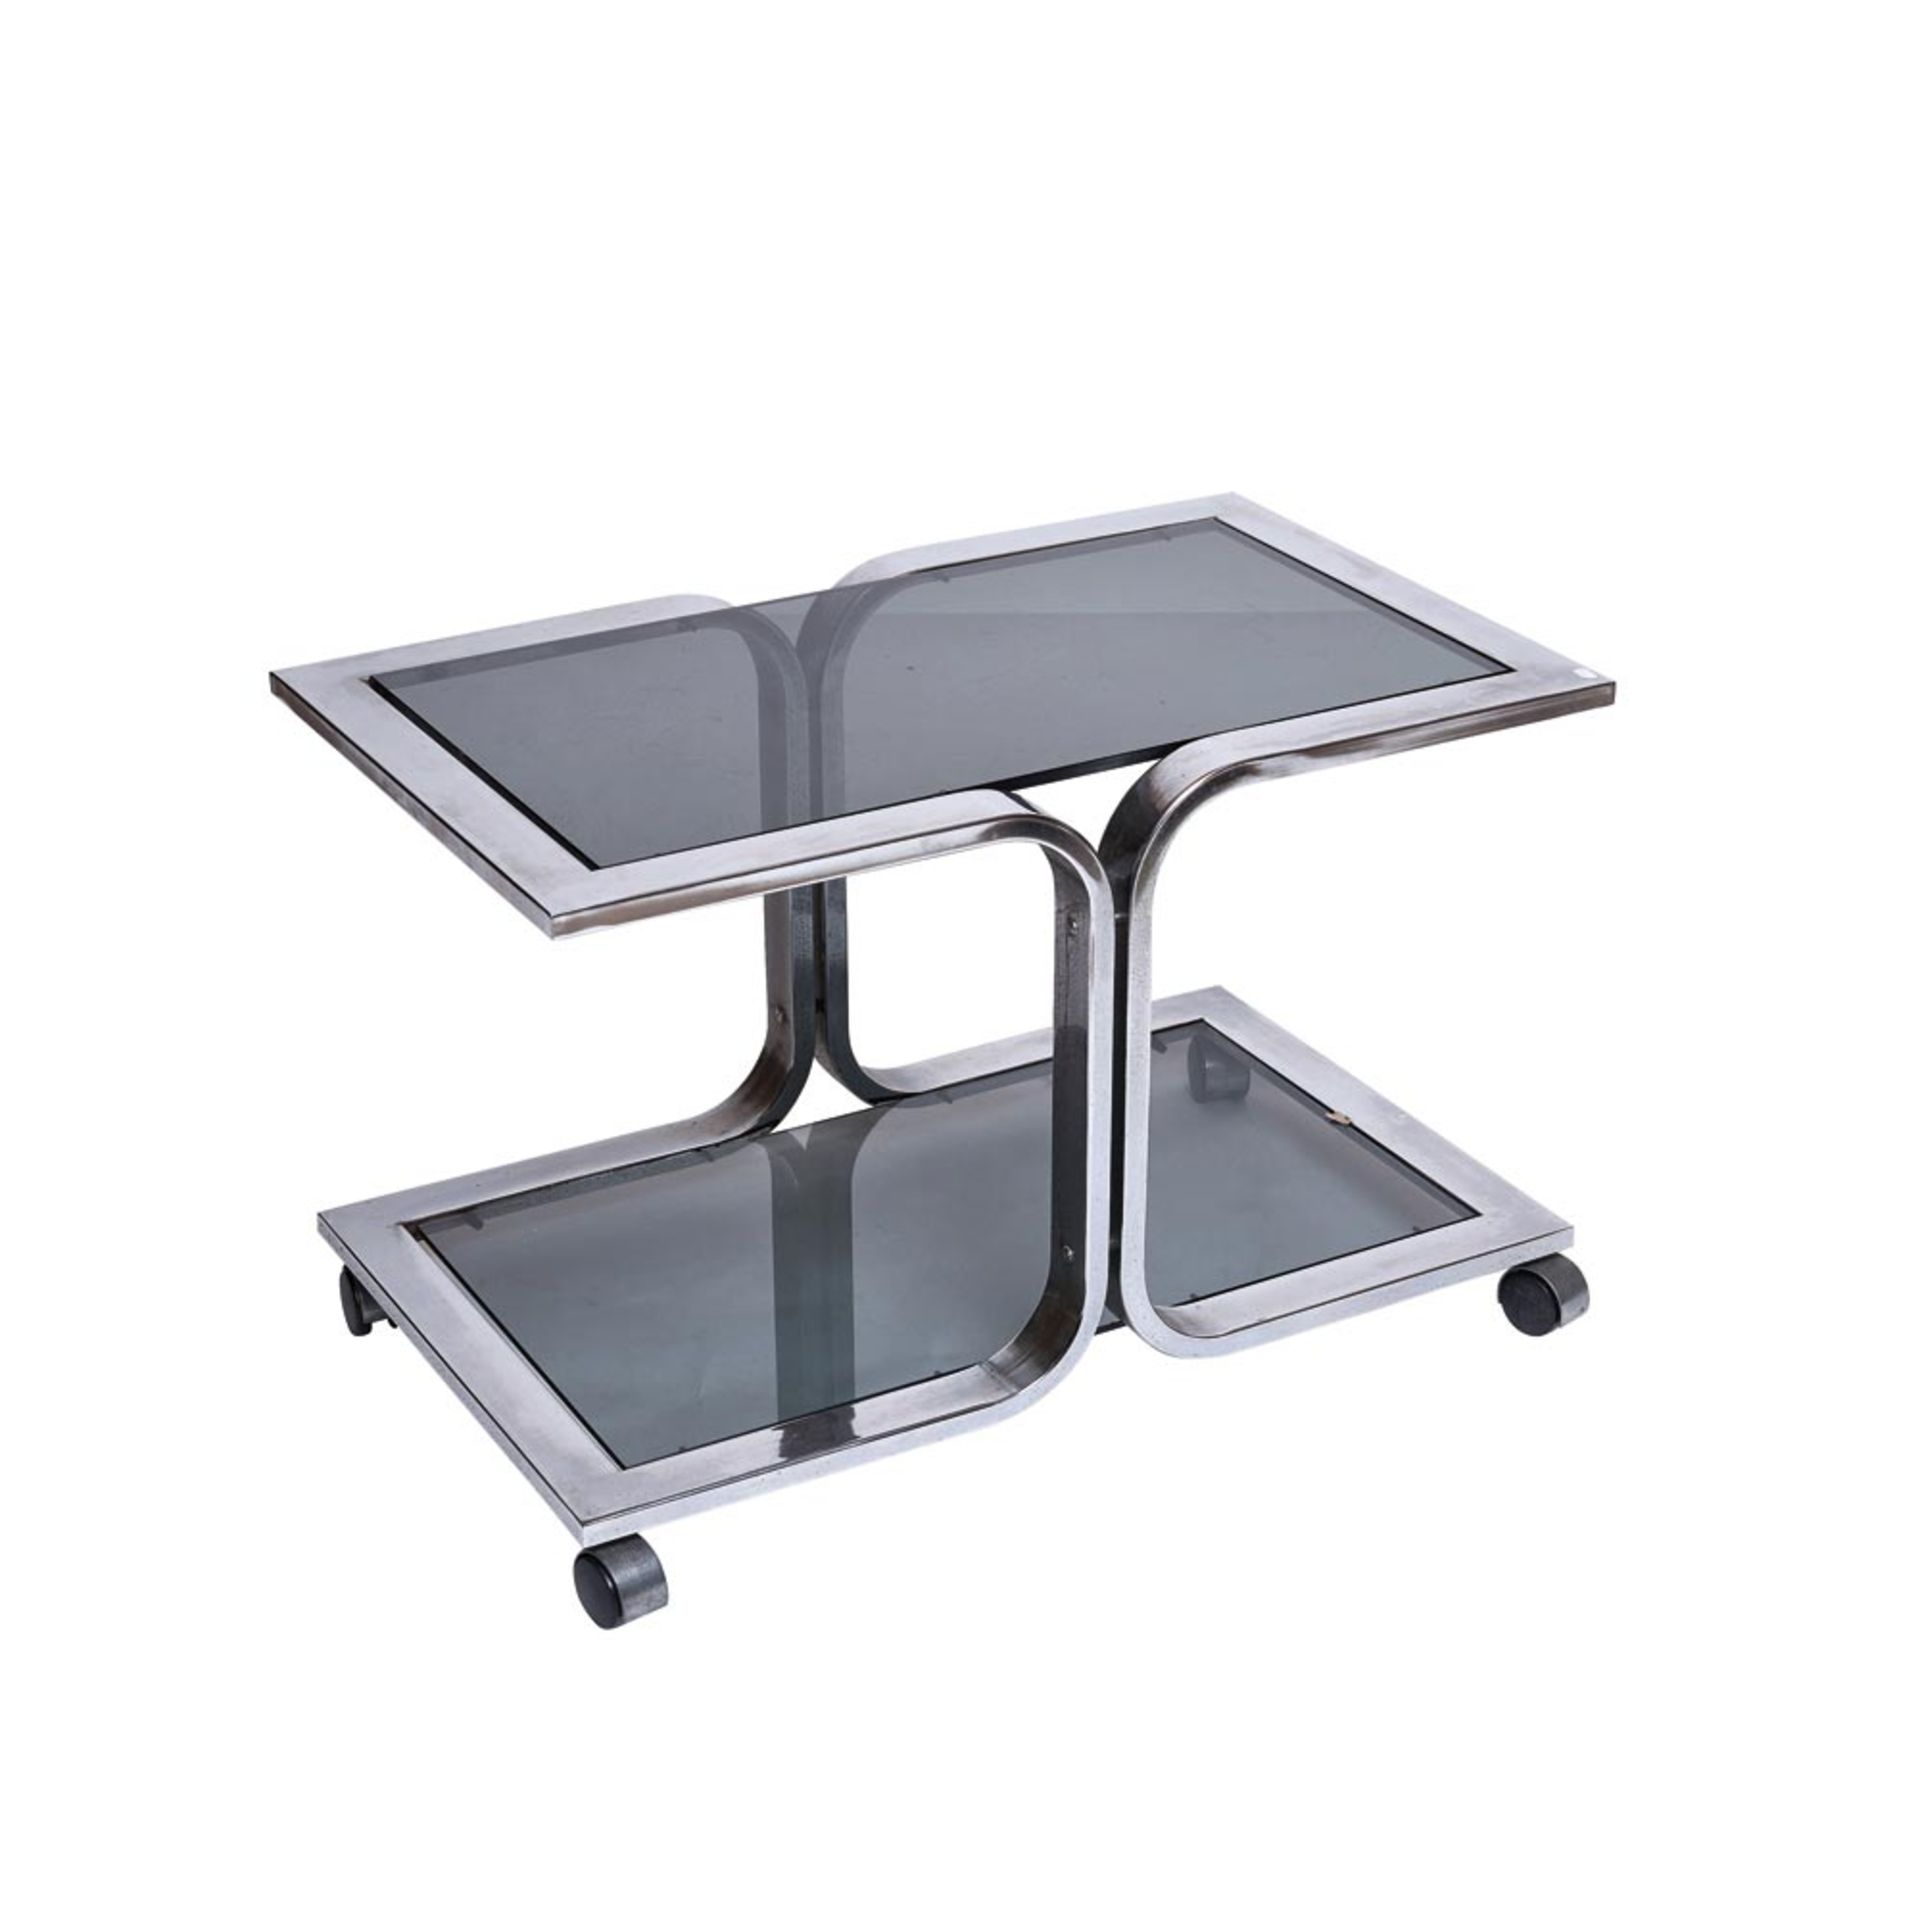 Steel and glass side table